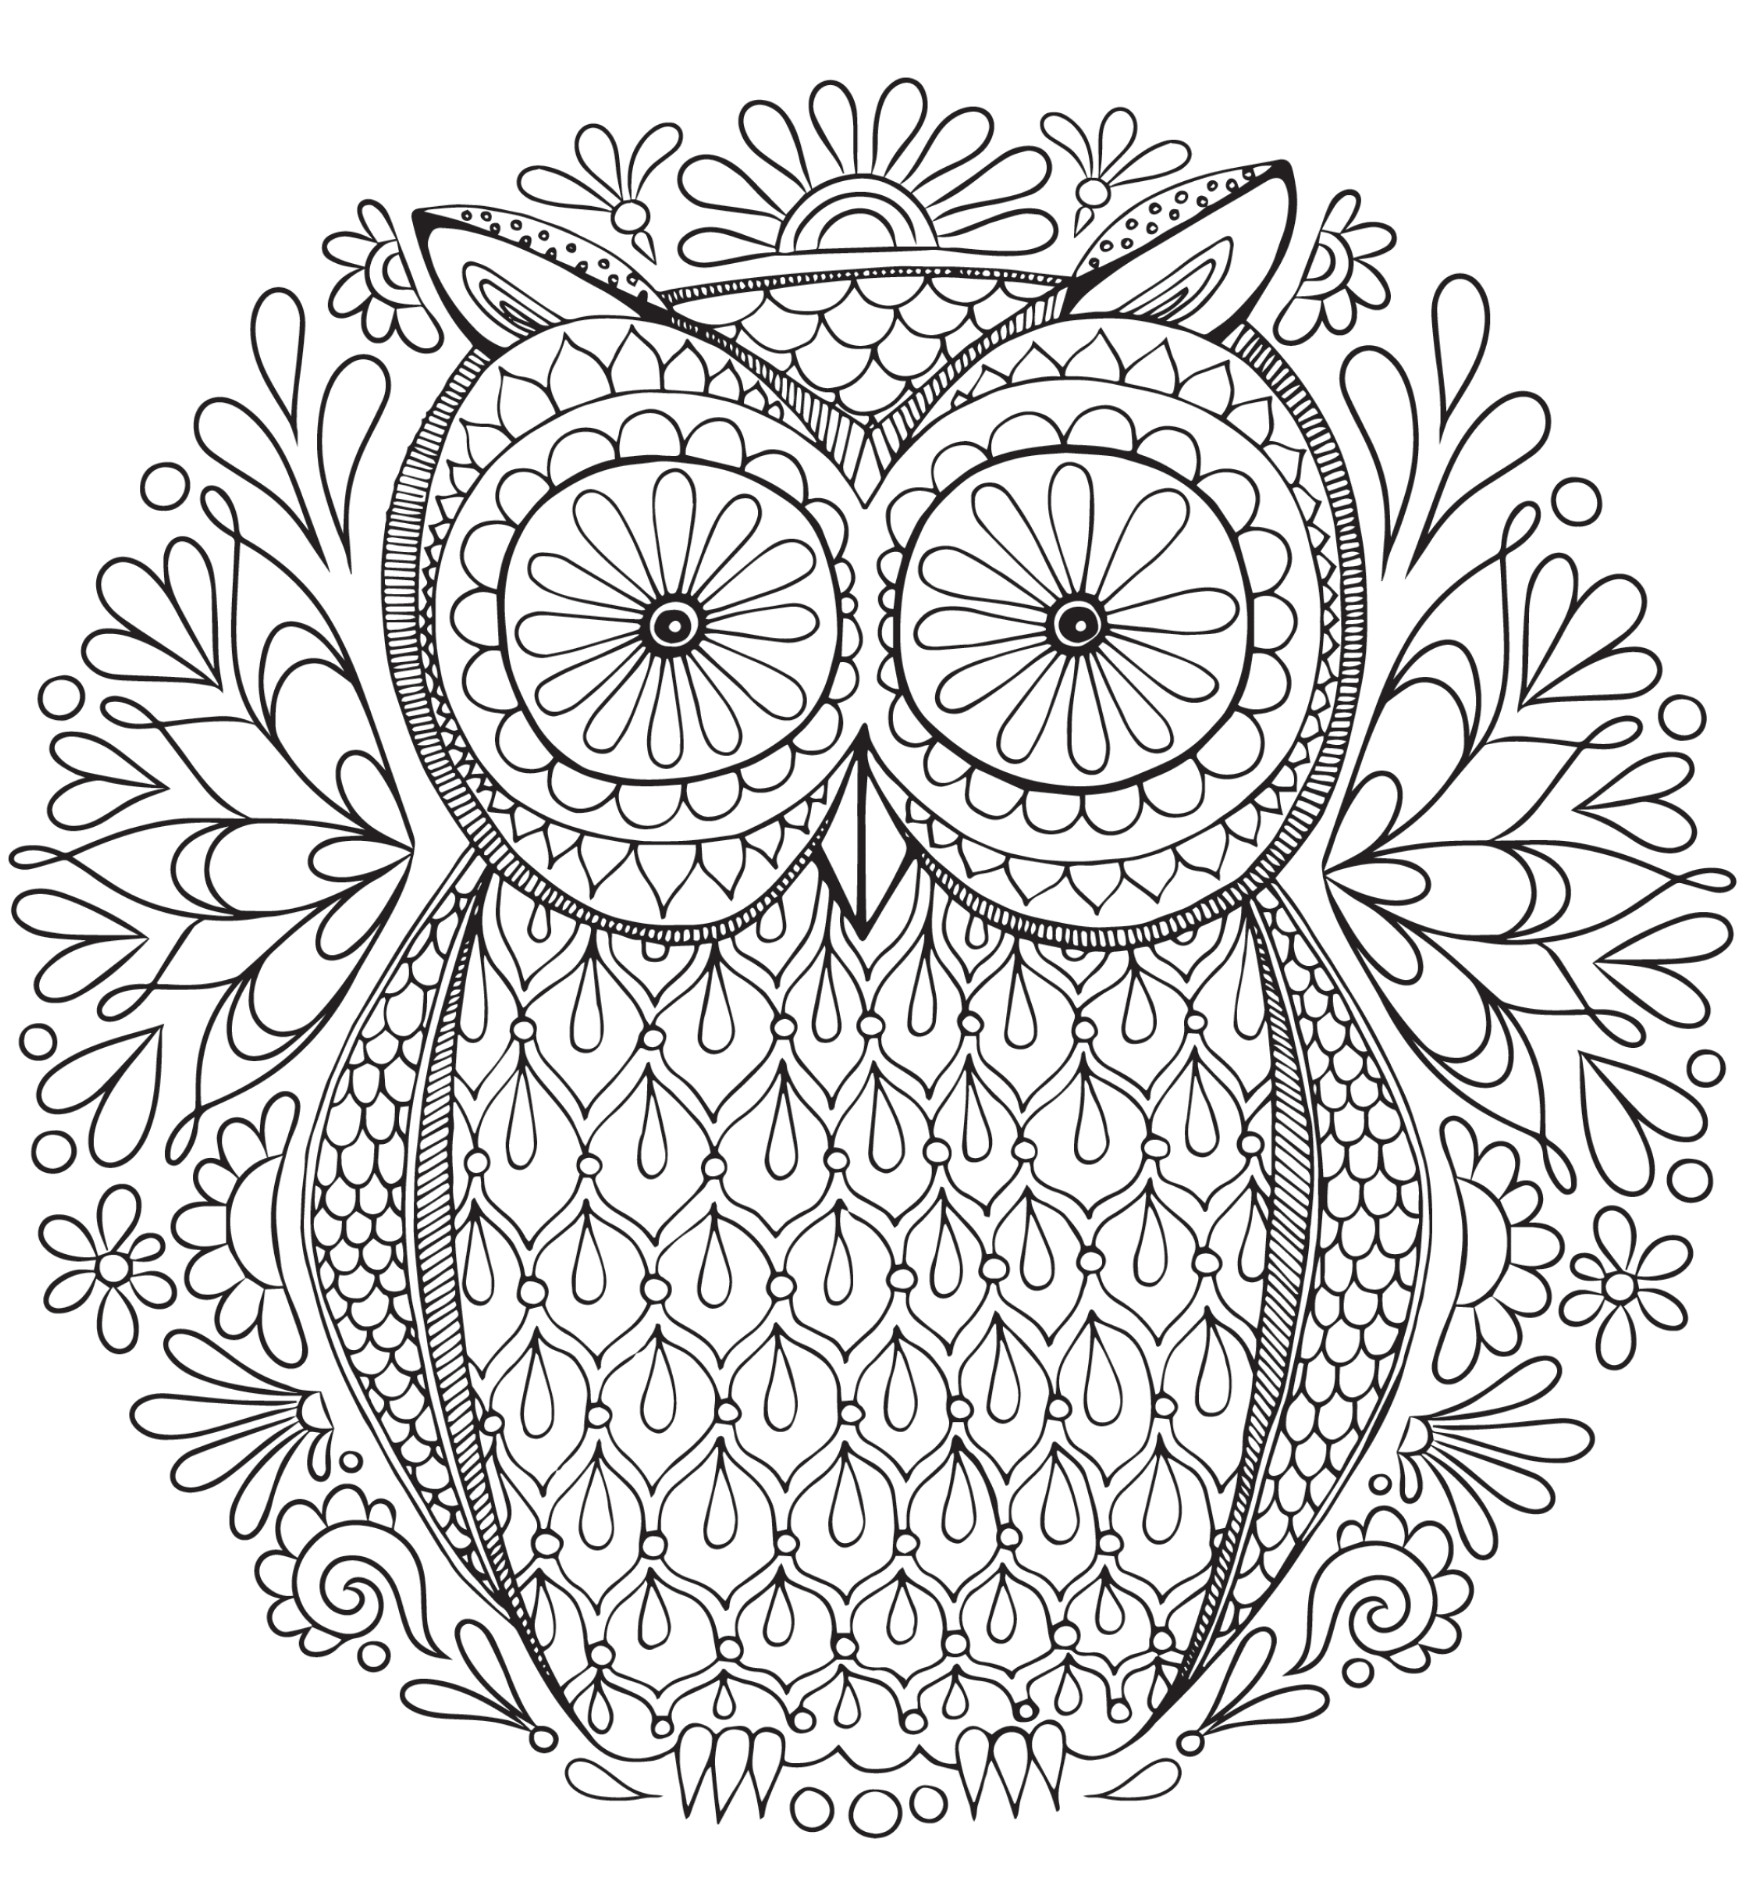 Coloring Pages For Adults Printable Free
 20 Free Adult Colouring Pages The Organised Housewife